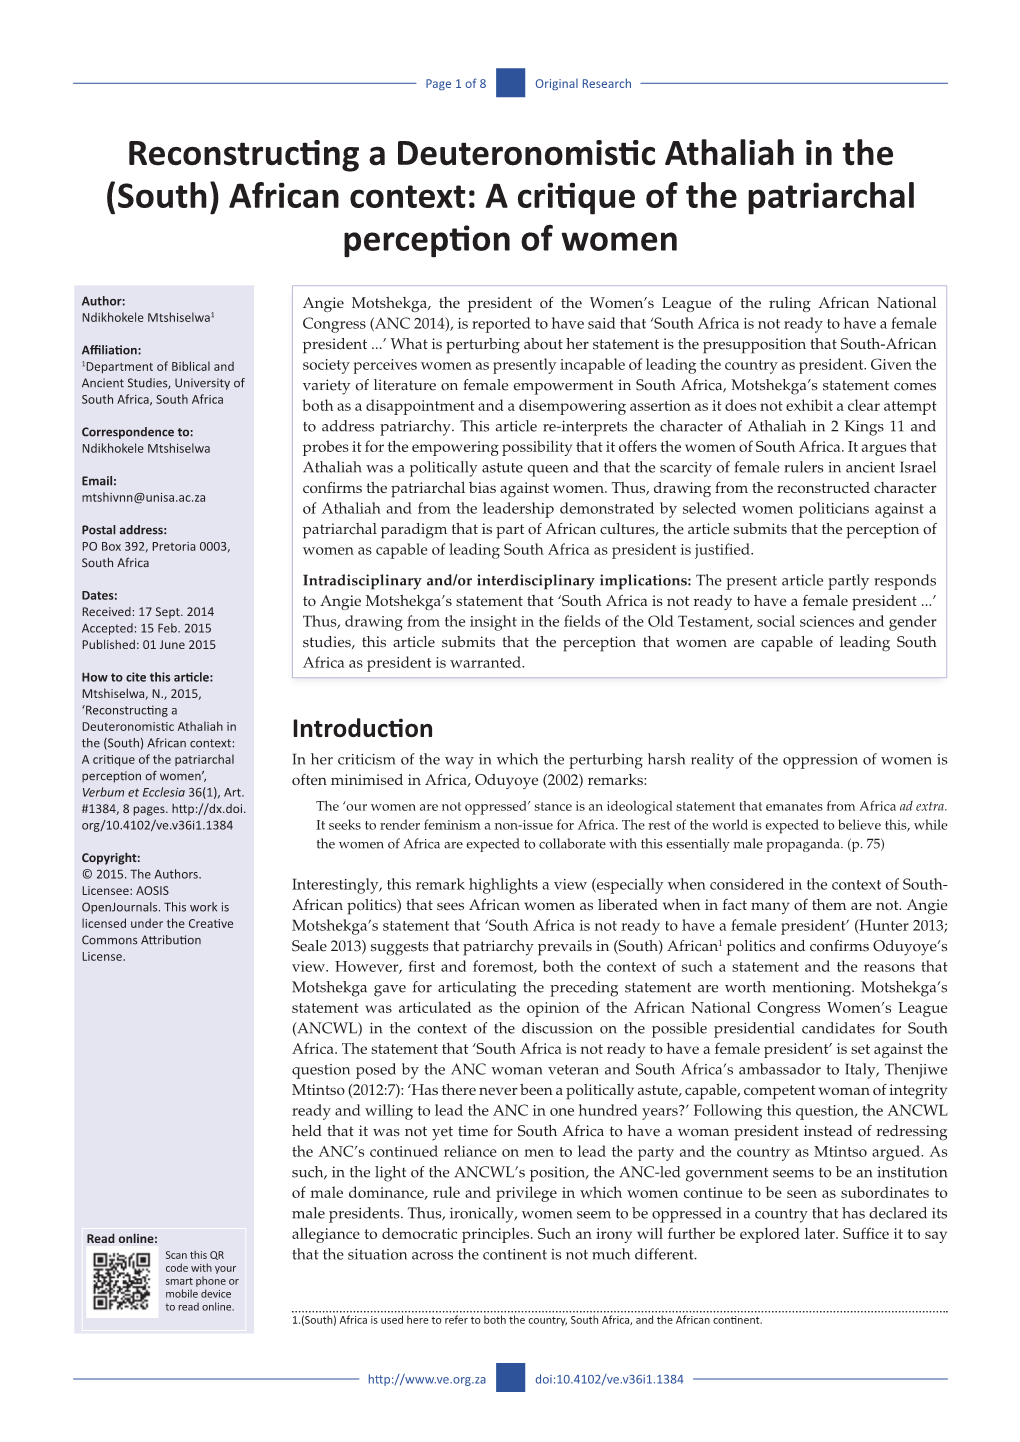 (South) African Context: a Critique of the Patriarchal Perception of Women